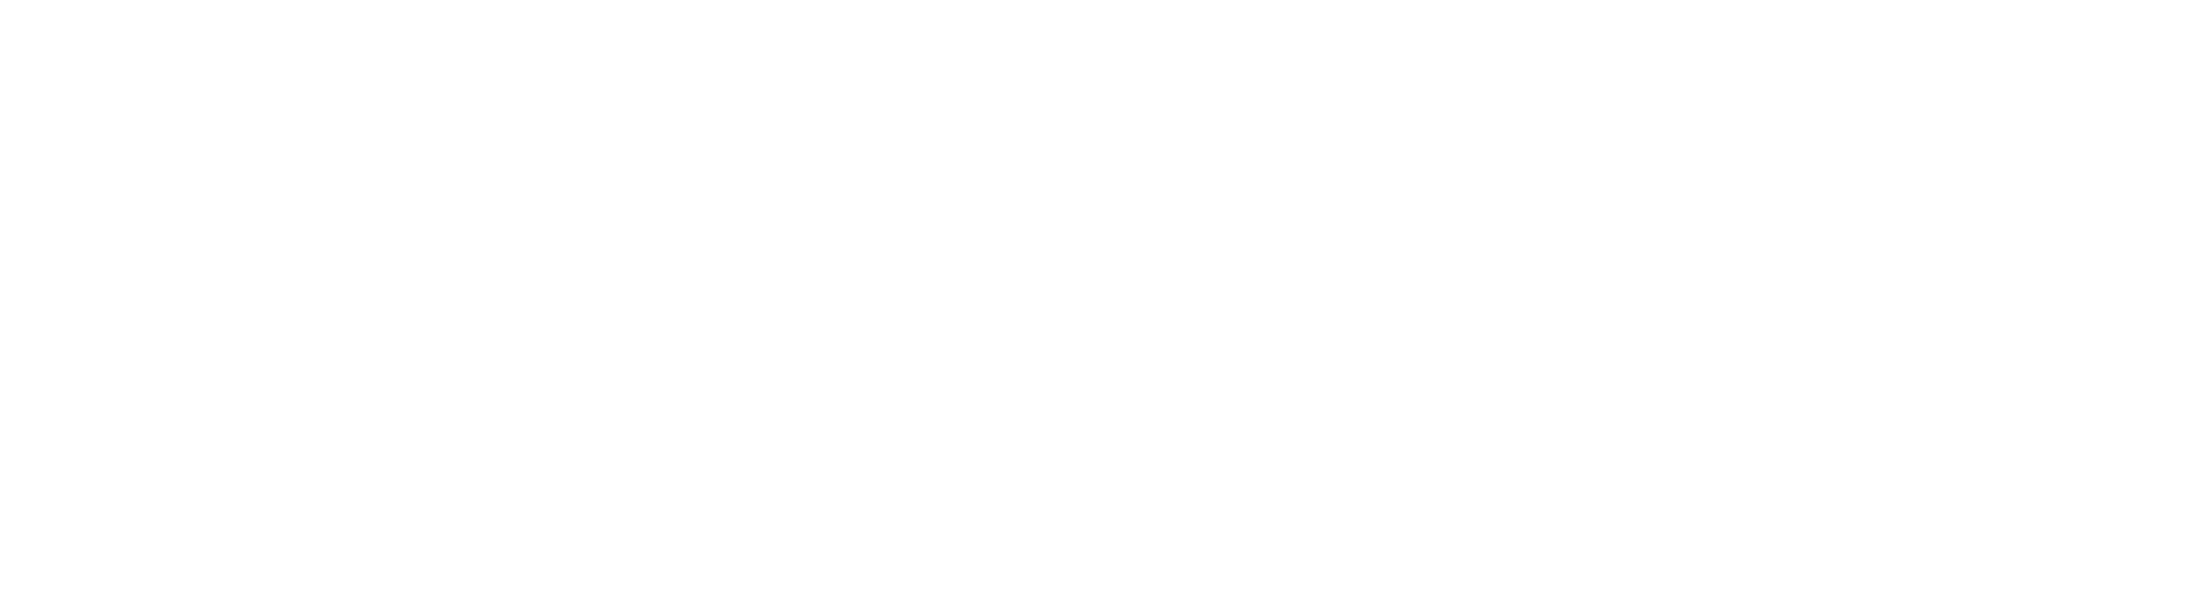 410-samsung-electronics-logo-black-and-white-16826358969126.png